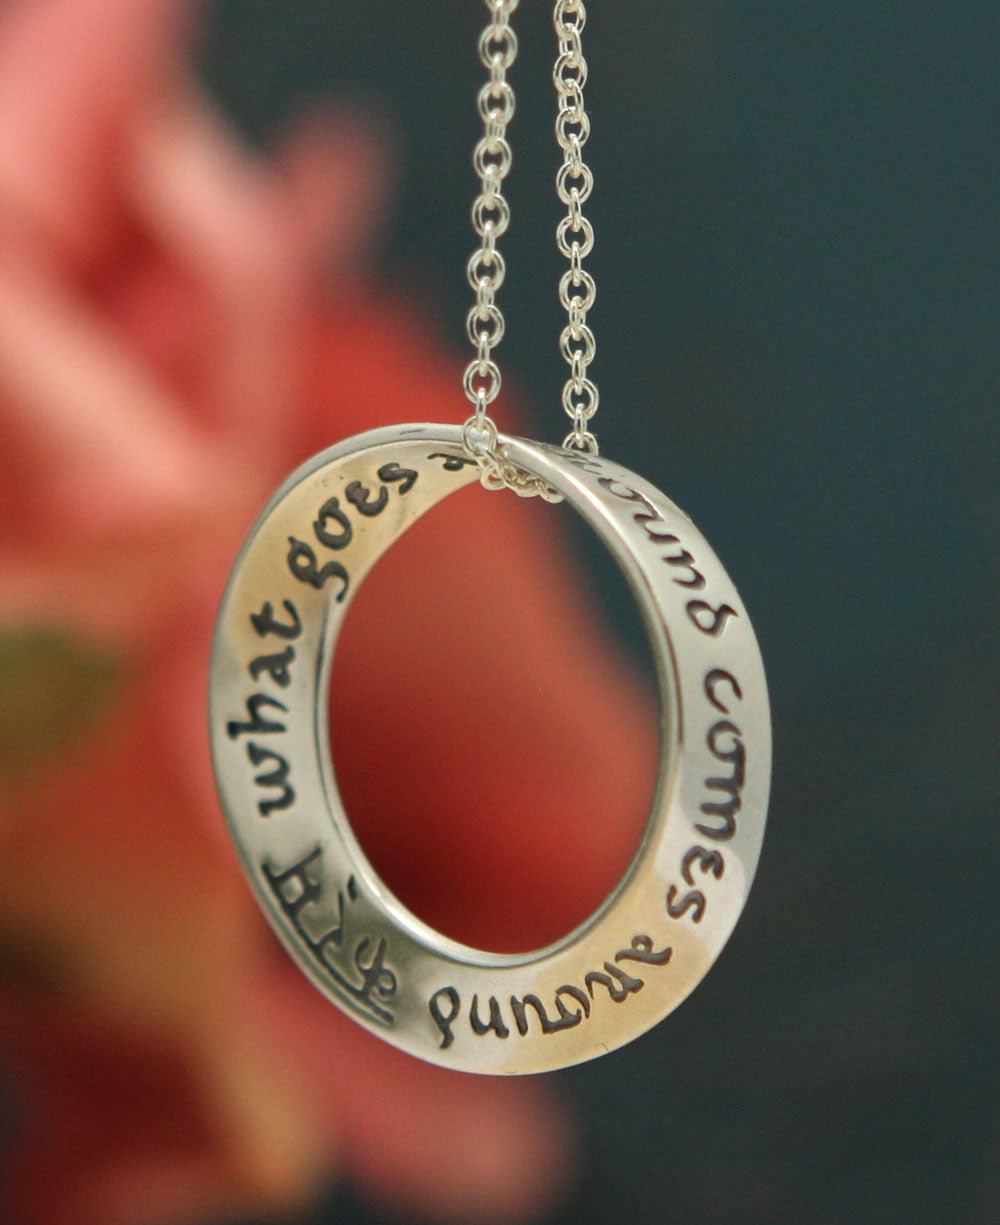 Karmic Loop Necklace, What Goes Around Comes Around - Necklaces